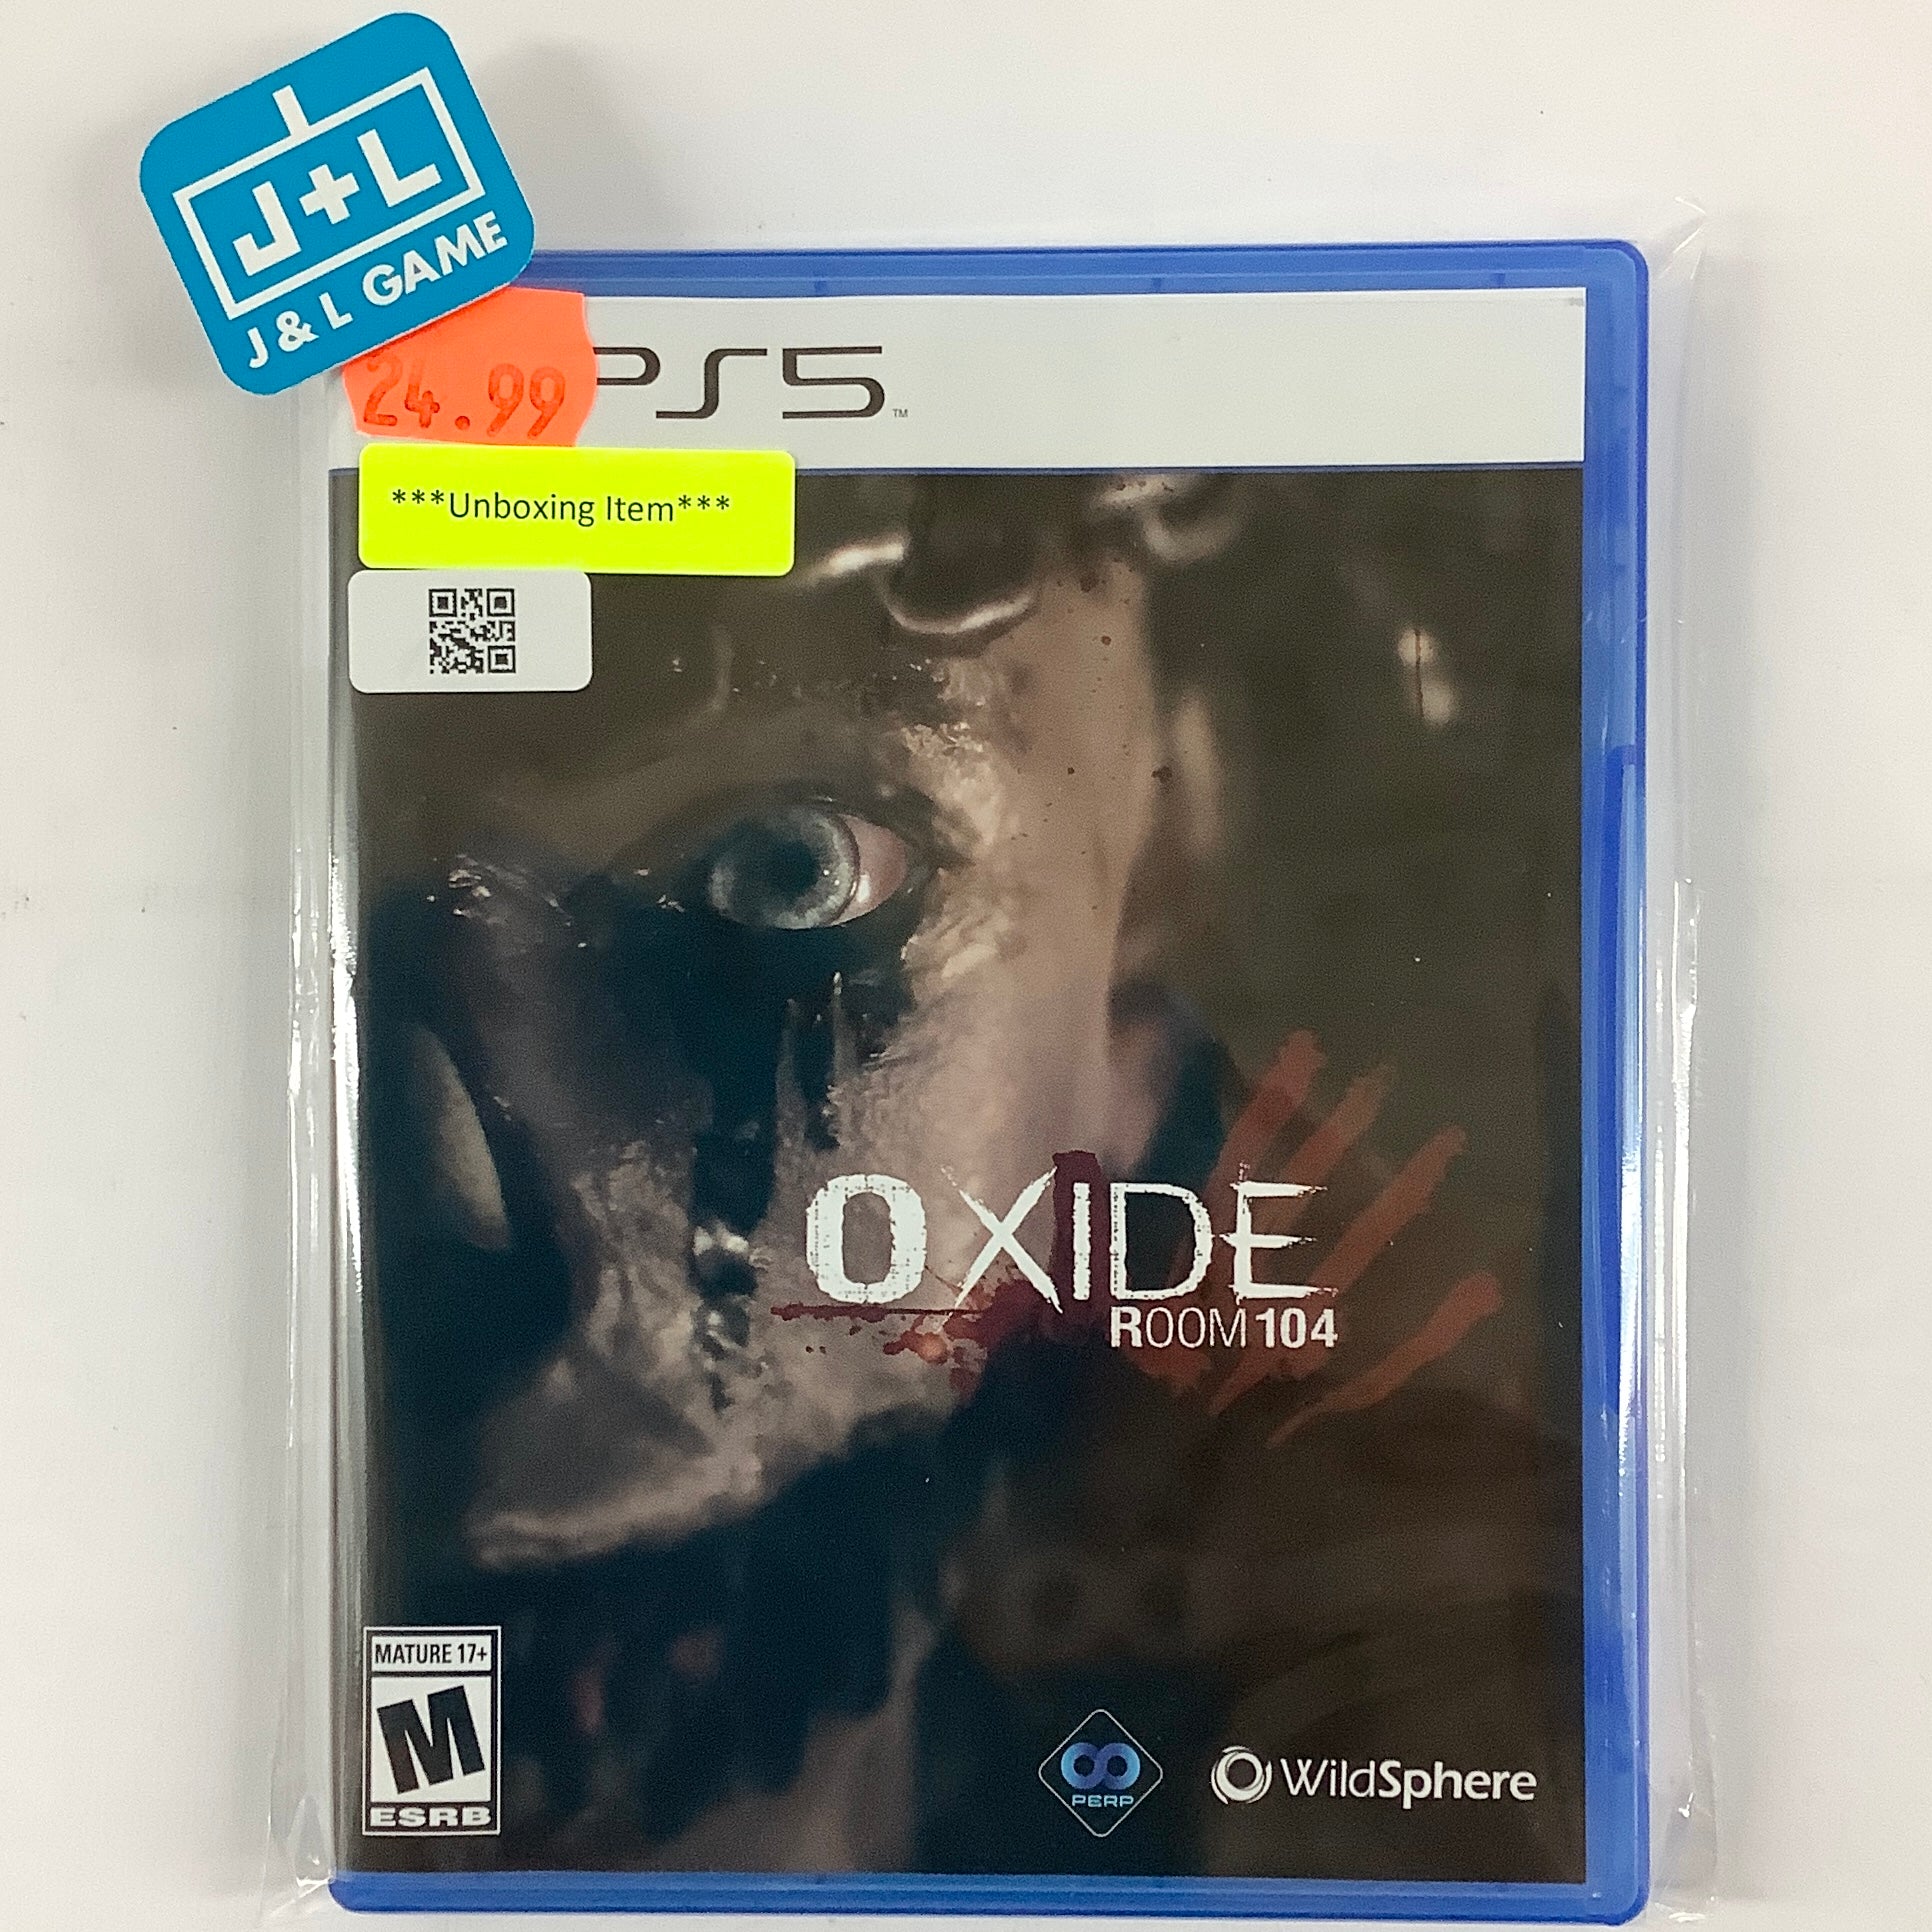 Oxide Room 104 - (PS5) PlayStation 5 [UNBOXING] Video Games Perp Games   